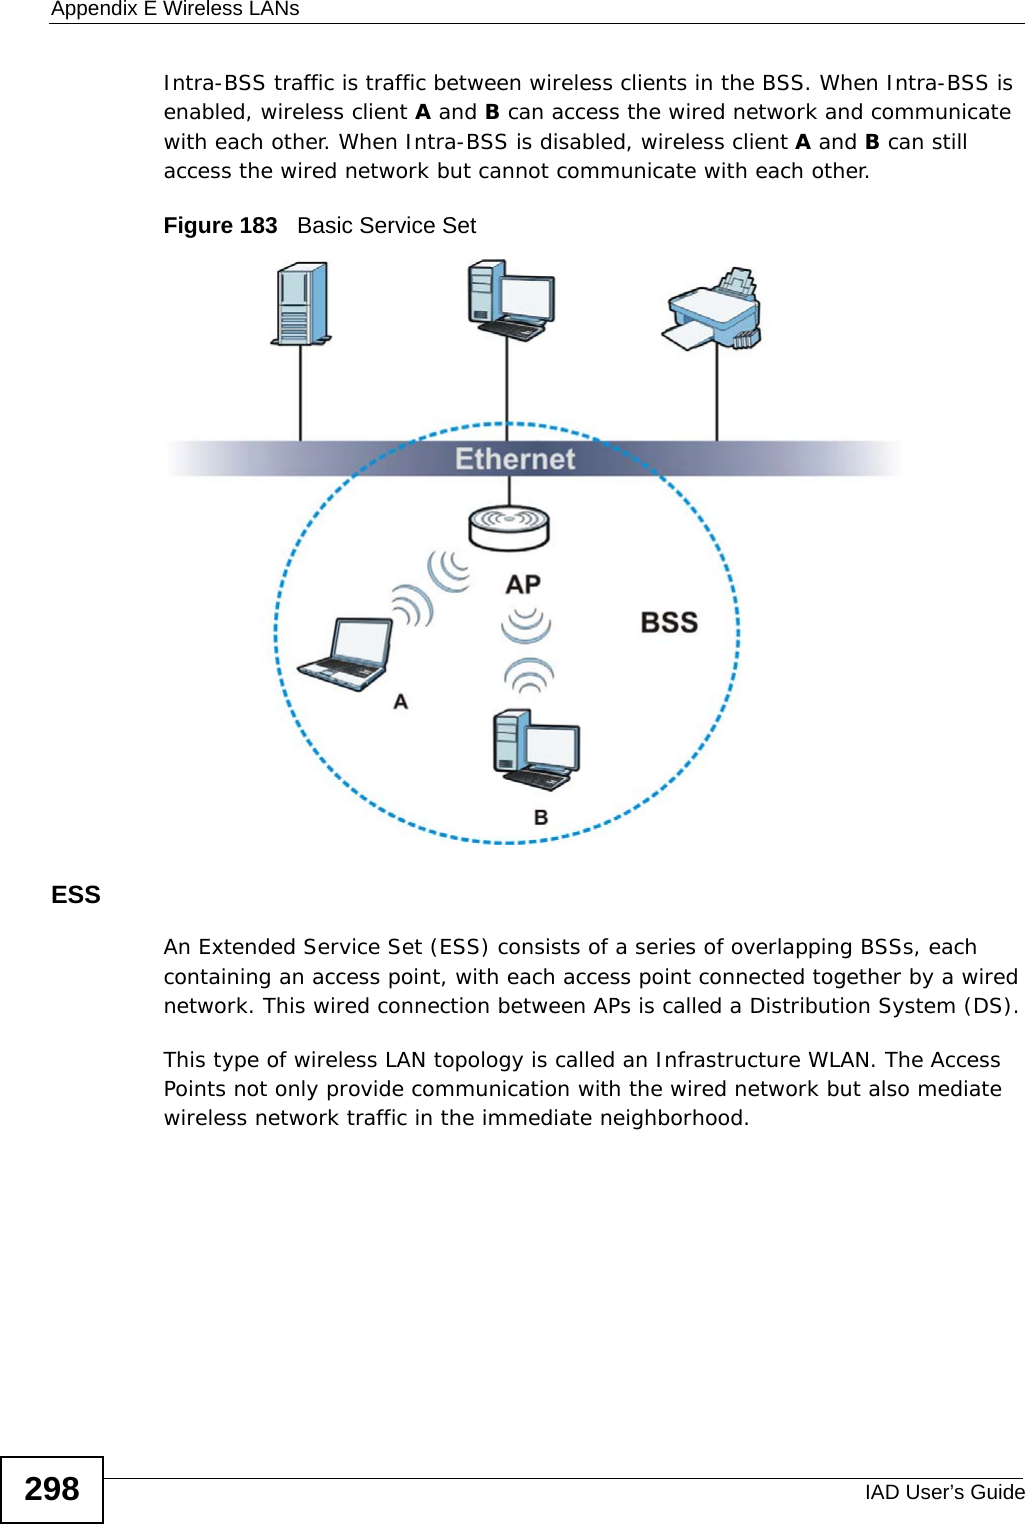 Appendix E Wireless LANsIAD User’s Guide298Intra-BSS traffic is traffic between wireless clients in the BSS. When Intra-BSS is enabled, wireless client A and B can access the wired network and communicate with each other. When Intra-BSS is disabled, wireless client A and B can still access the wired network but cannot communicate with each other.Figure 183   Basic Service SetESSAn Extended Service Set (ESS) consists of a series of overlapping BSSs, each containing an access point, with each access point connected together by a wired network. This wired connection between APs is called a Distribution System (DS).This type of wireless LAN topology is called an Infrastructure WLAN. The Access Points not only provide communication with the wired network but also mediate wireless network traffic in the immediate neighborhood. 